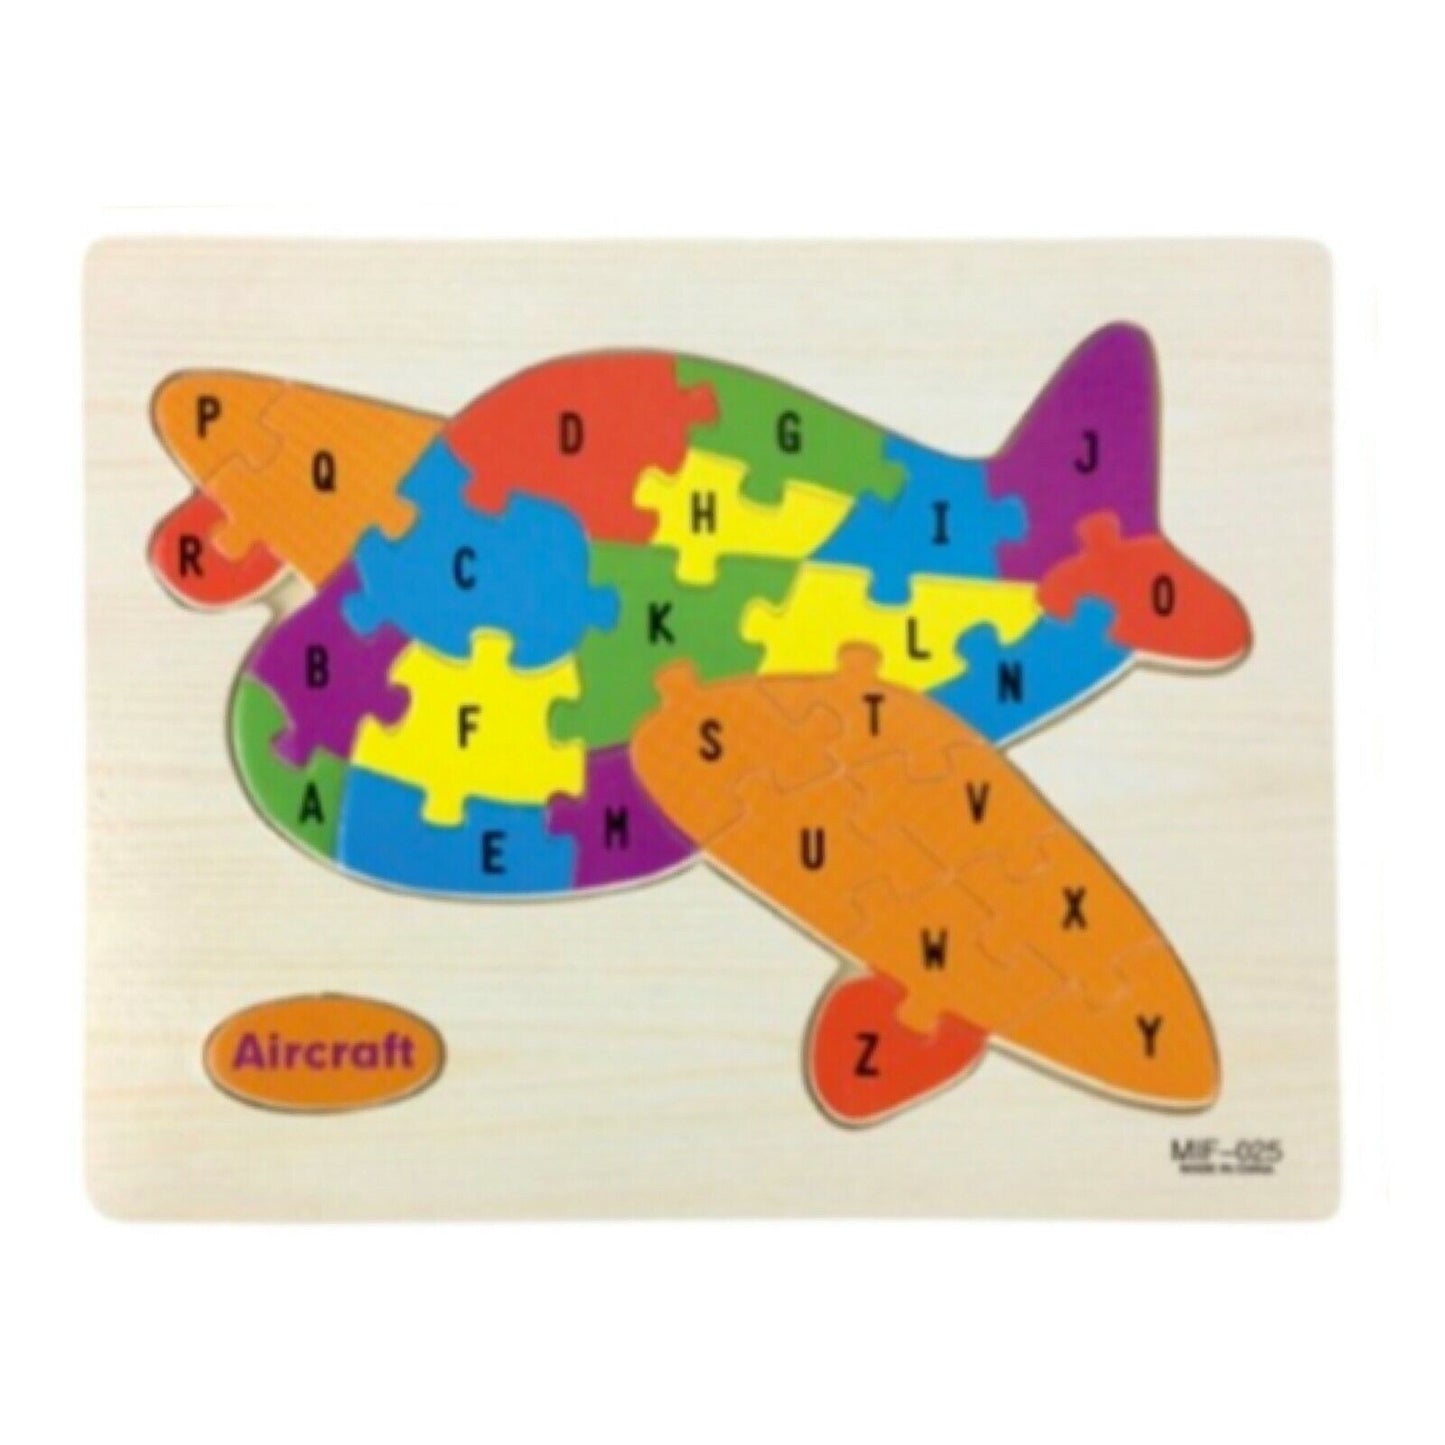 Wooden Vehicle Jigzaw Puzzle - Choose from Aeroplane, Ship, Truck or Tractor